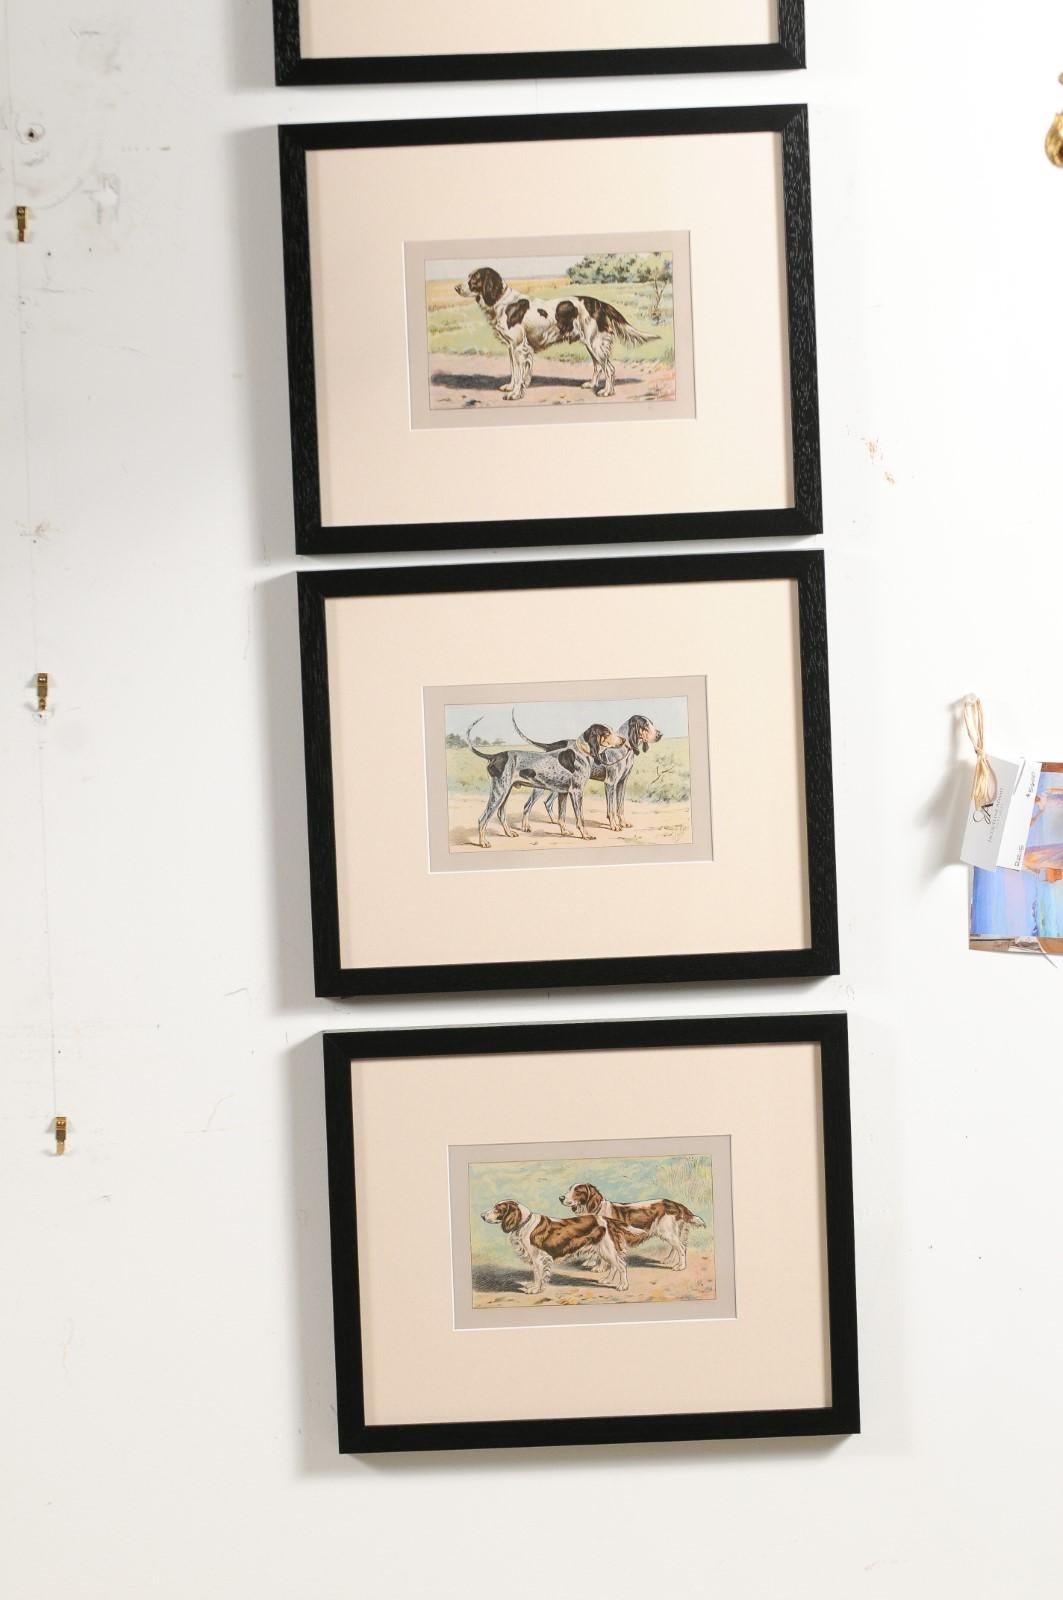 P. Mahler Custom Framed Lithographs Depicting Hunting Dogs in Outdoor Scenes 4